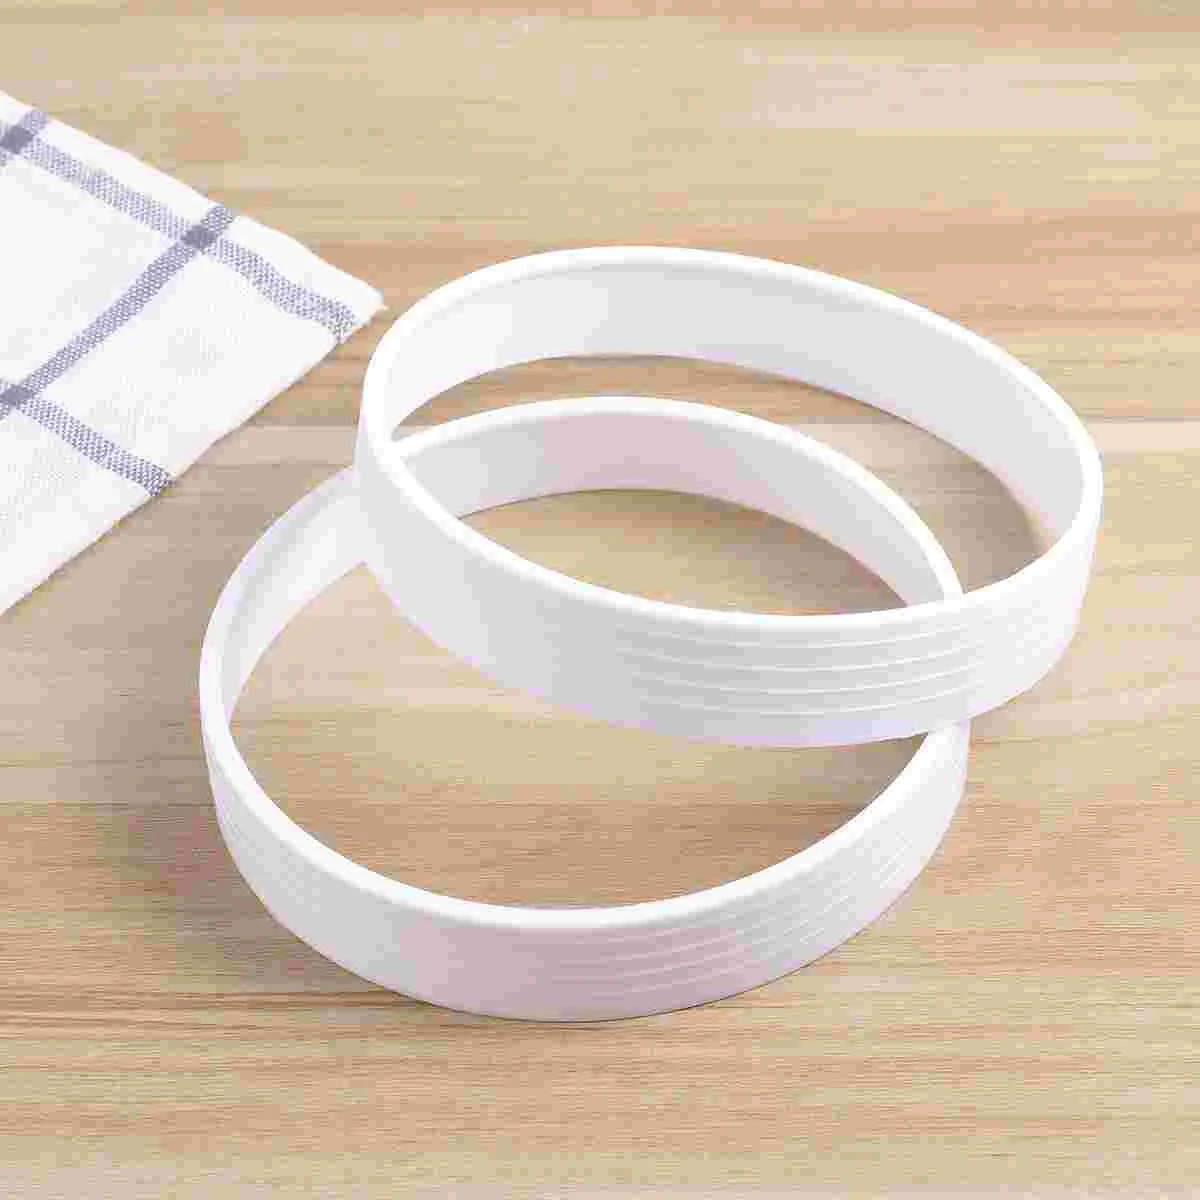 2 Pcs Plastic Ring Putter Hole Cup Ring Training Aid Accessories Putting Green Hole Rings Green Accessories